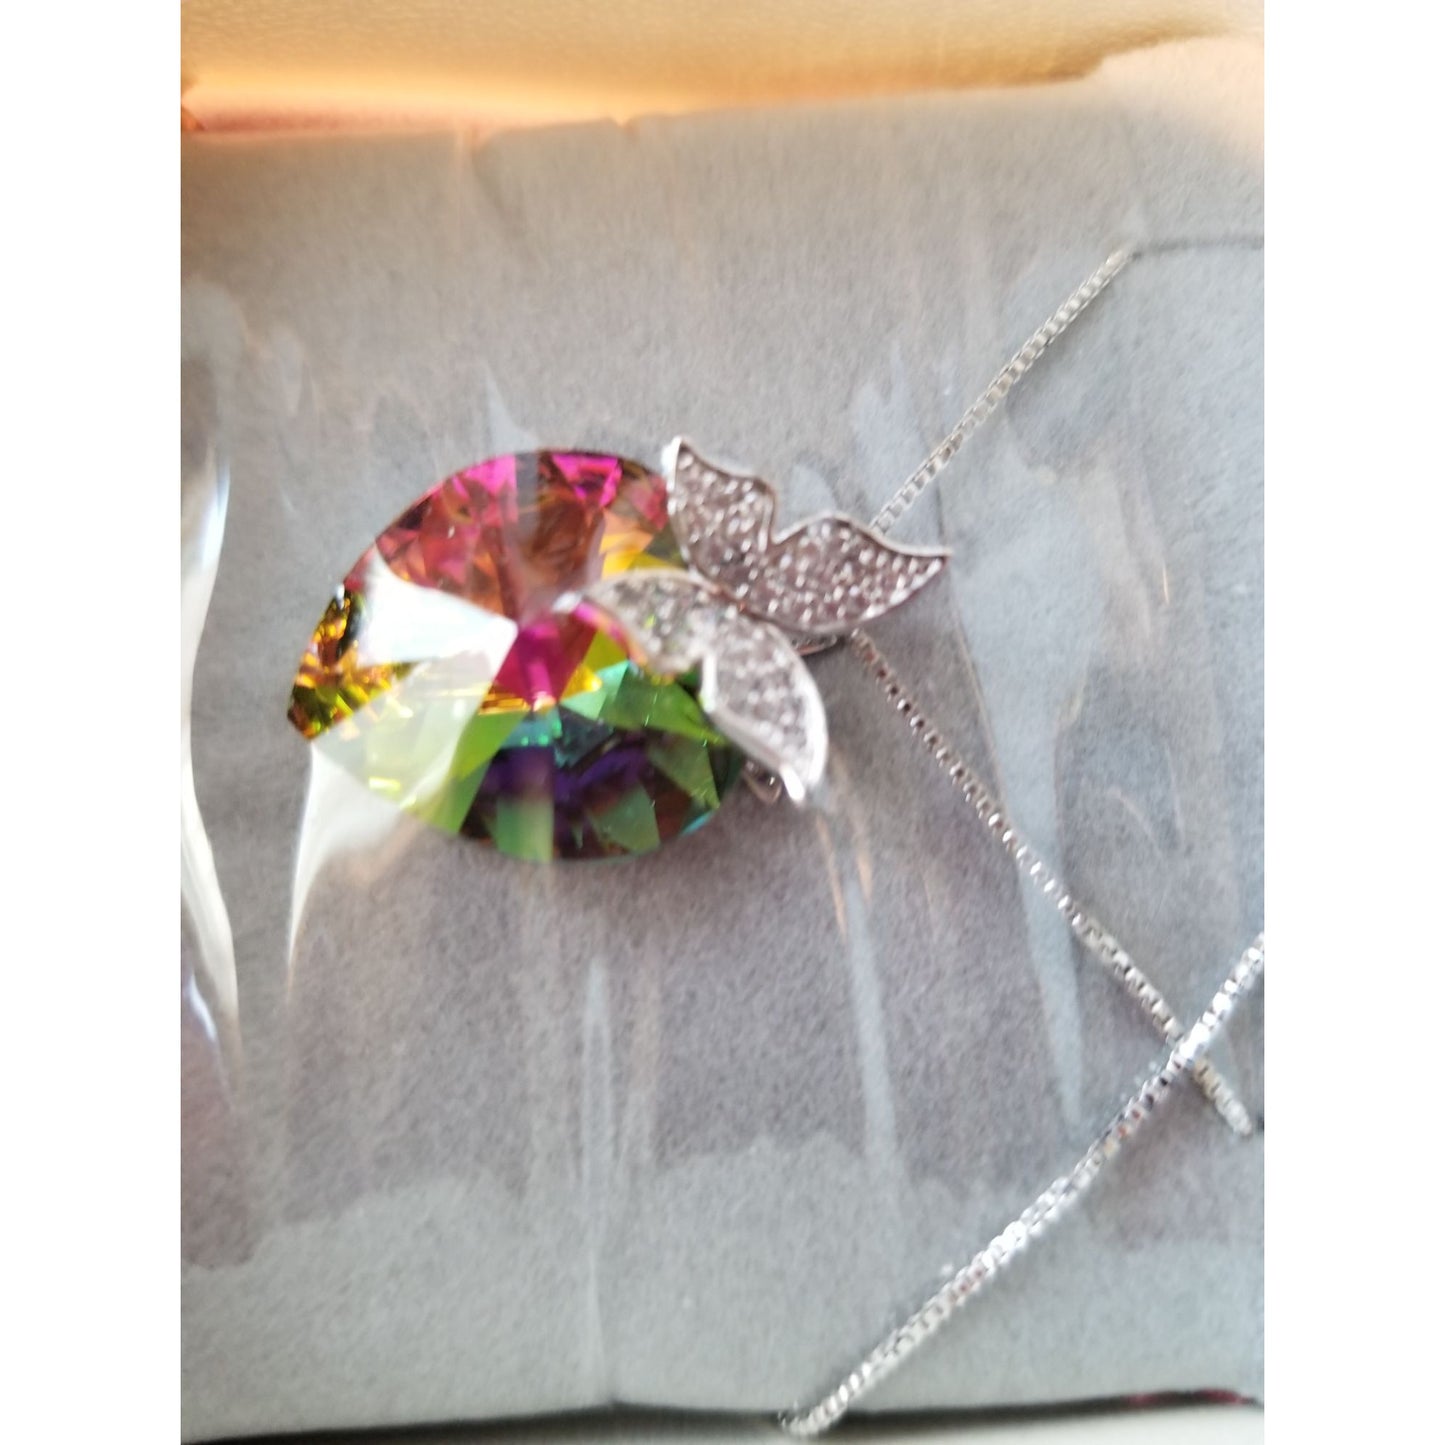 Necklace T400 Jewelers Butterfly Wing Pendant Heart shaped Swarovski Crystal  Bow Box Cleaning Cloth Care Instructions